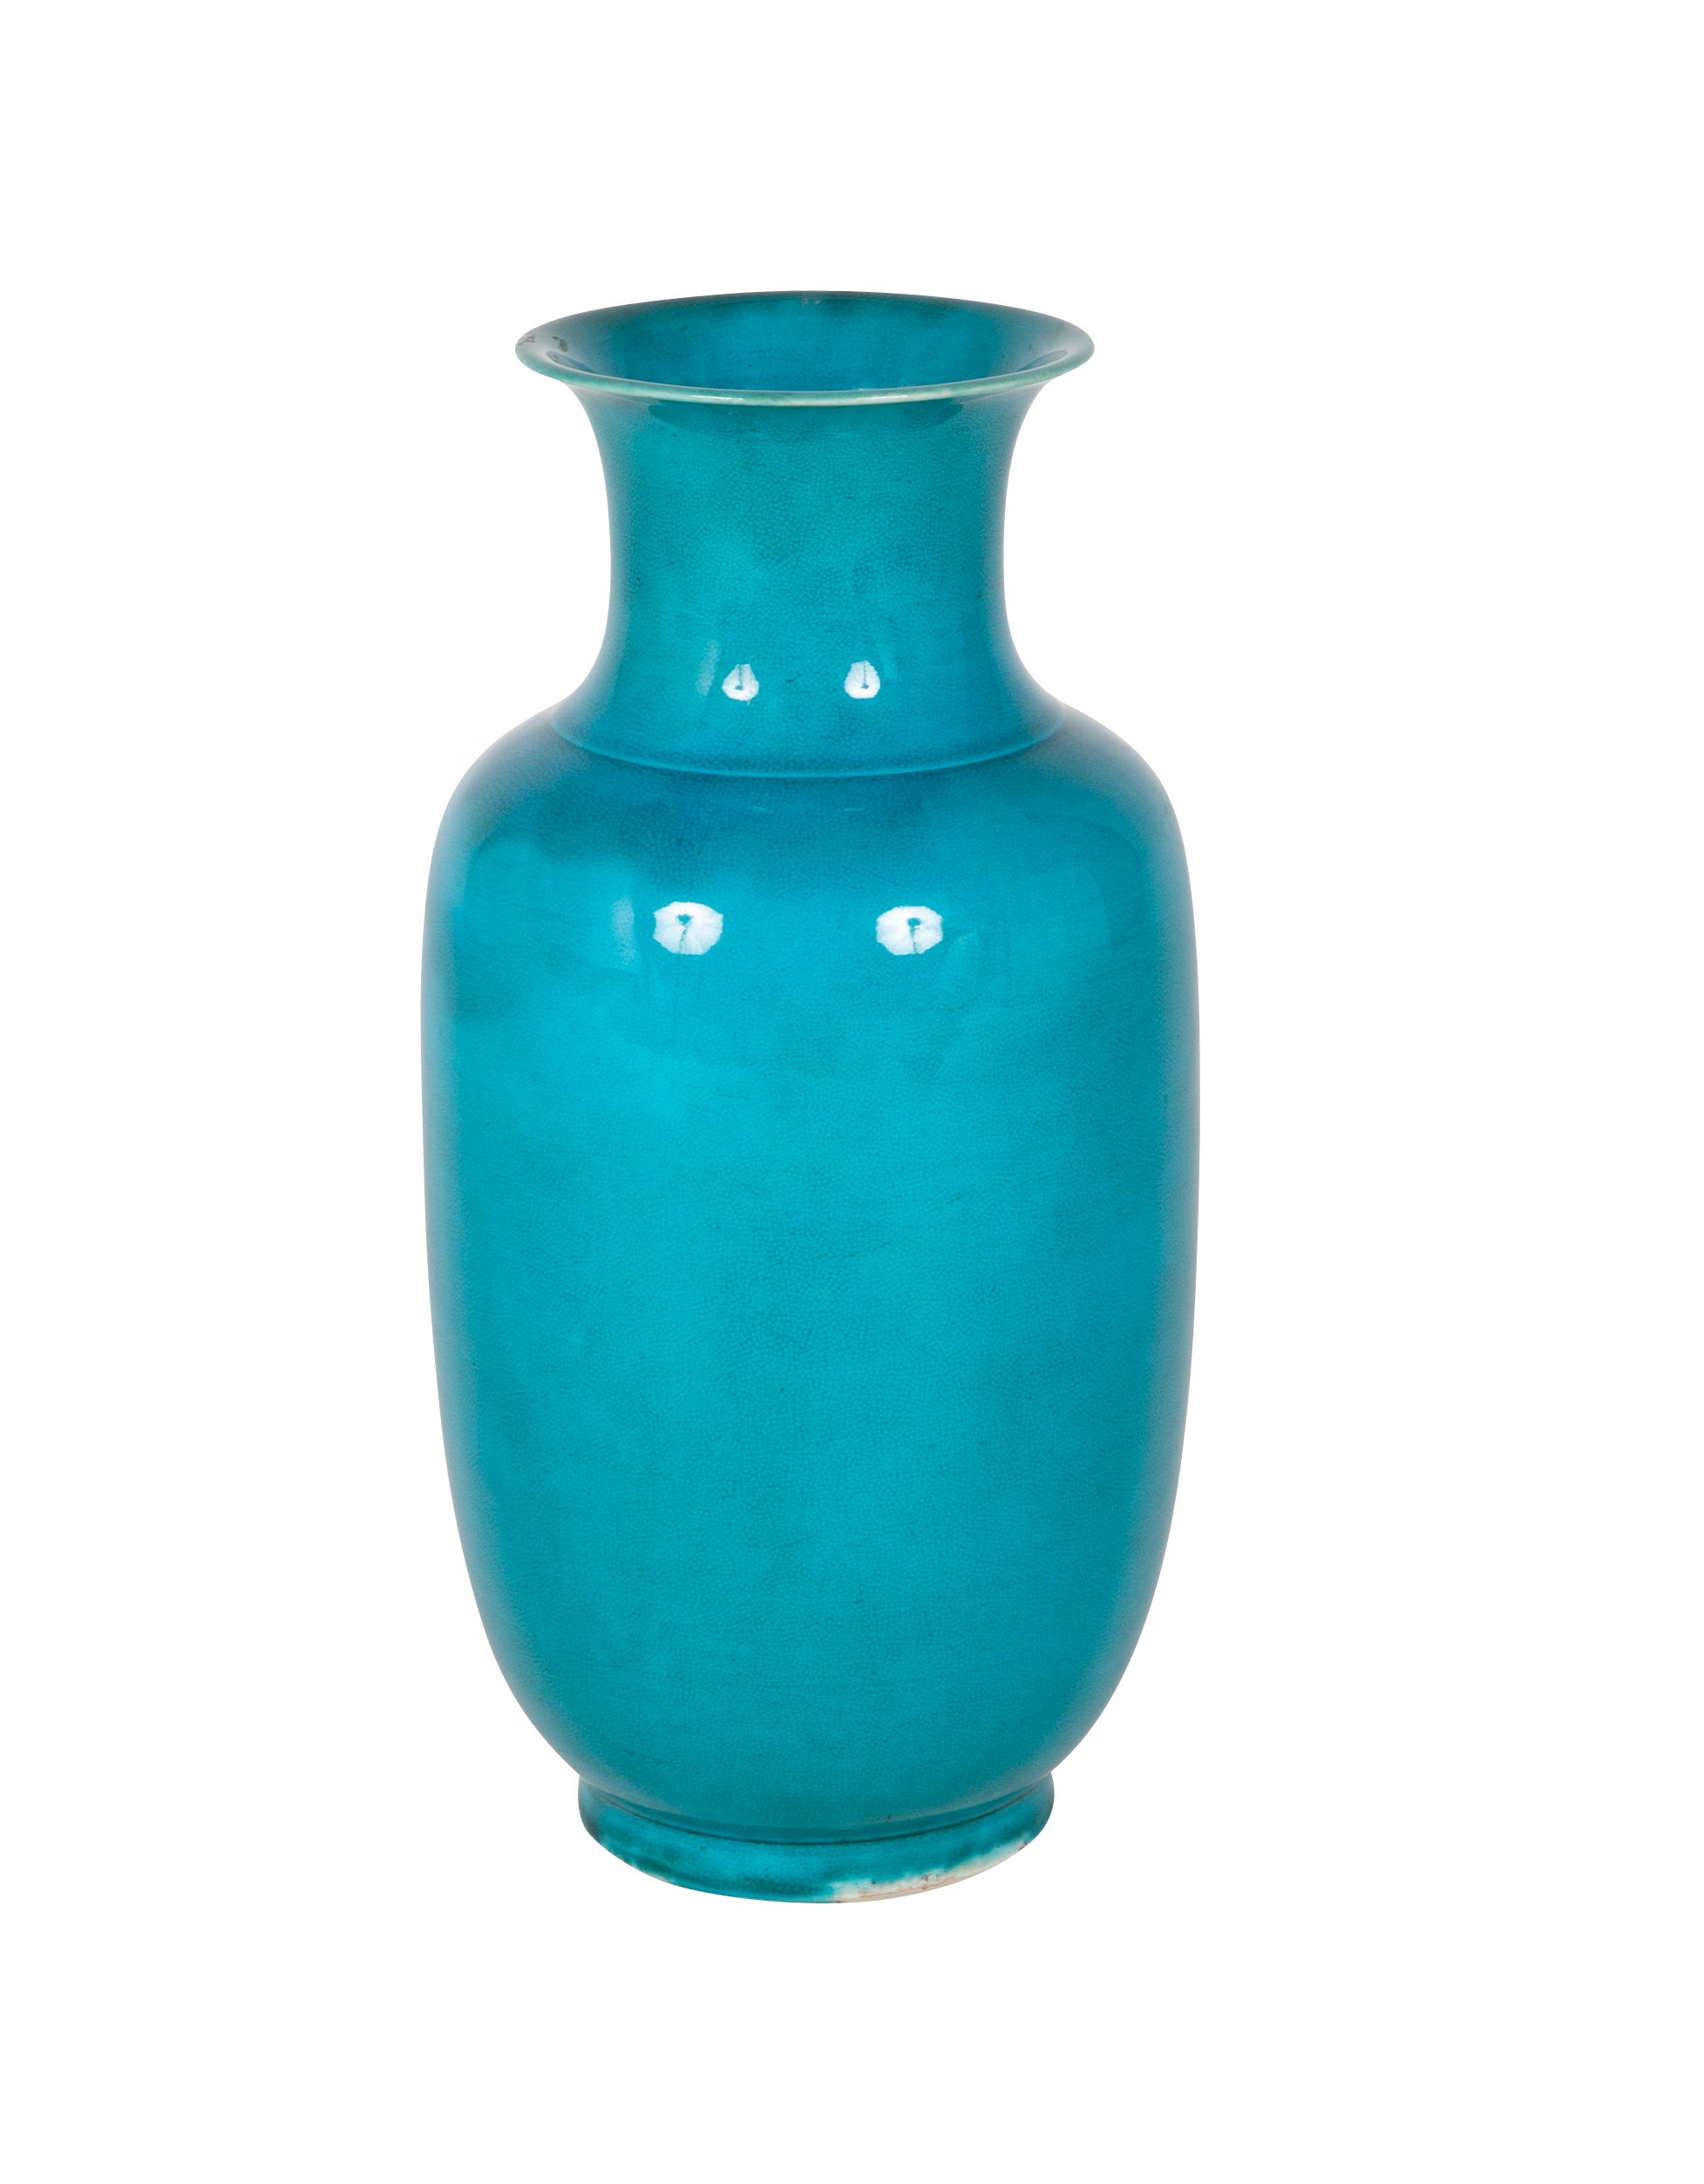 A Qing Dynasty Period Turquoise Flared Lip Vase